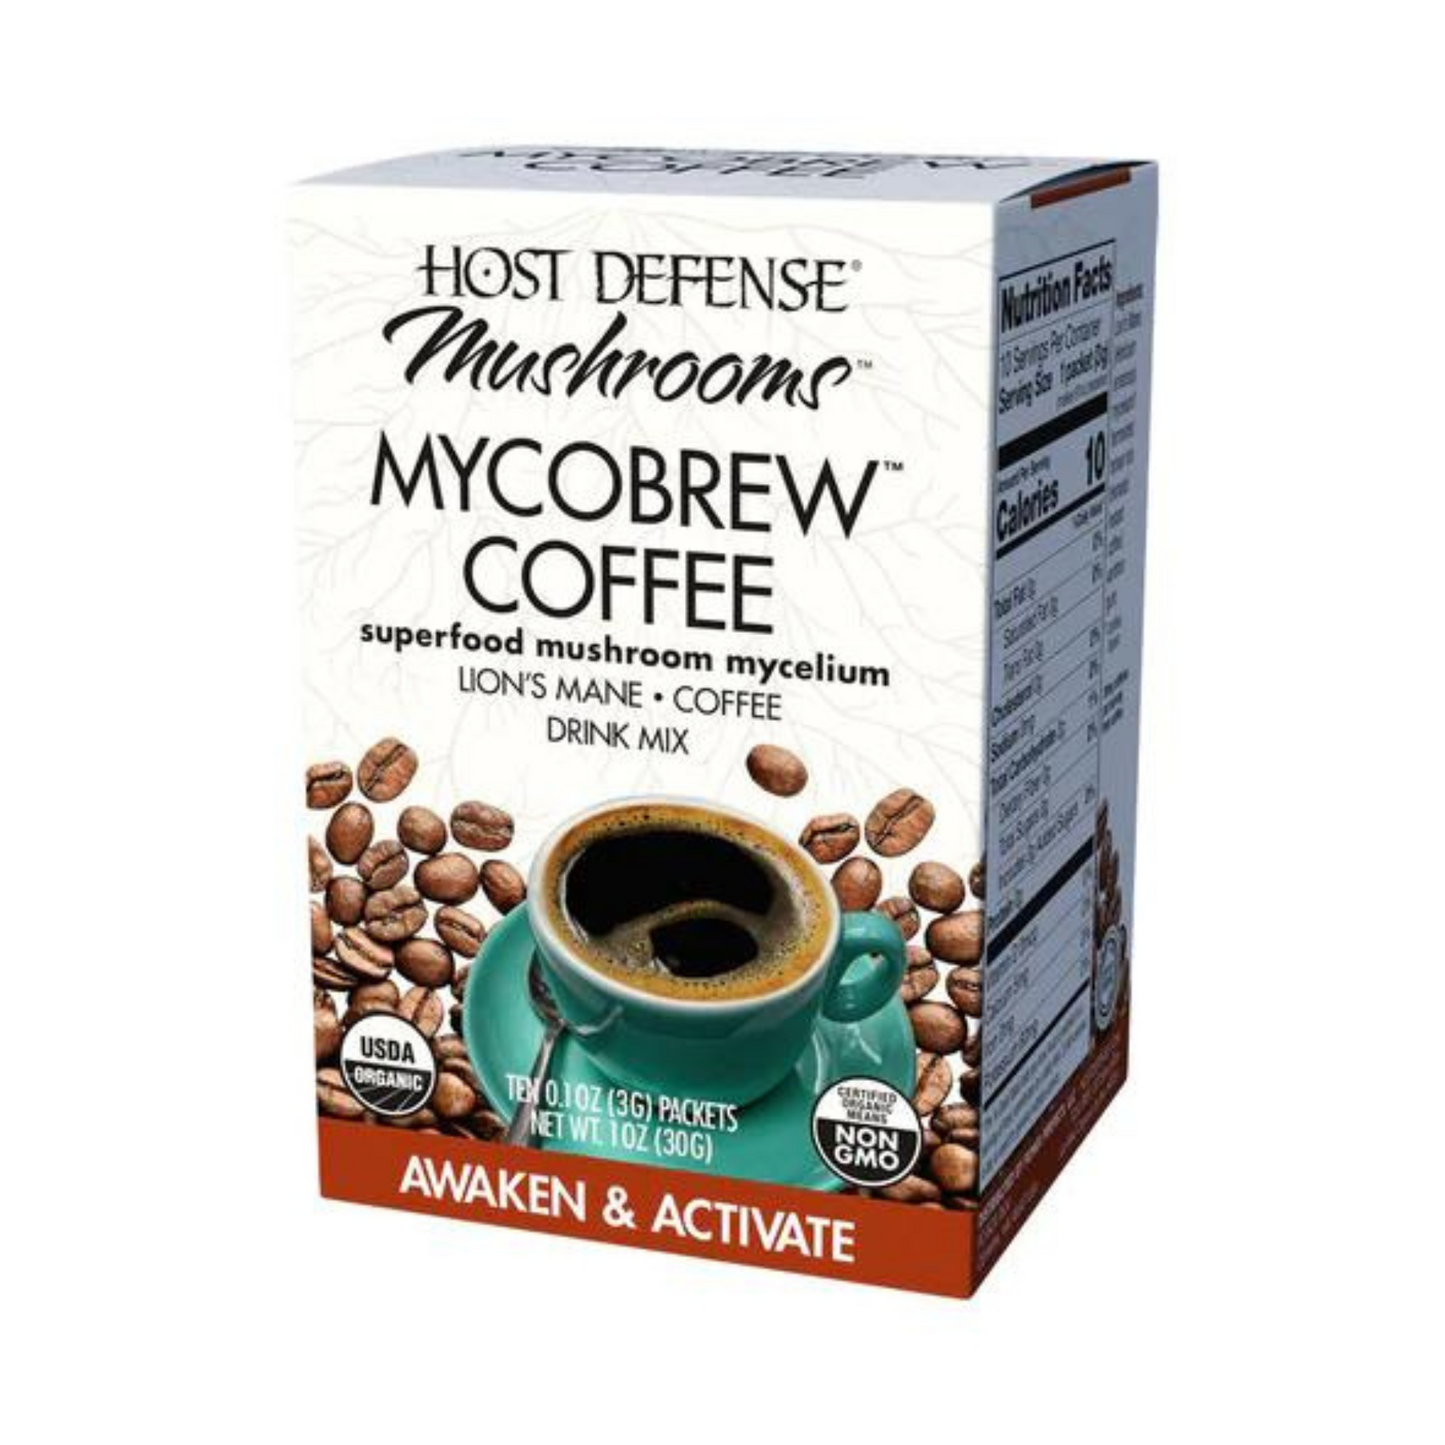 Primary Image of Host Defense MycoBrew Coffee Packets (10 count)